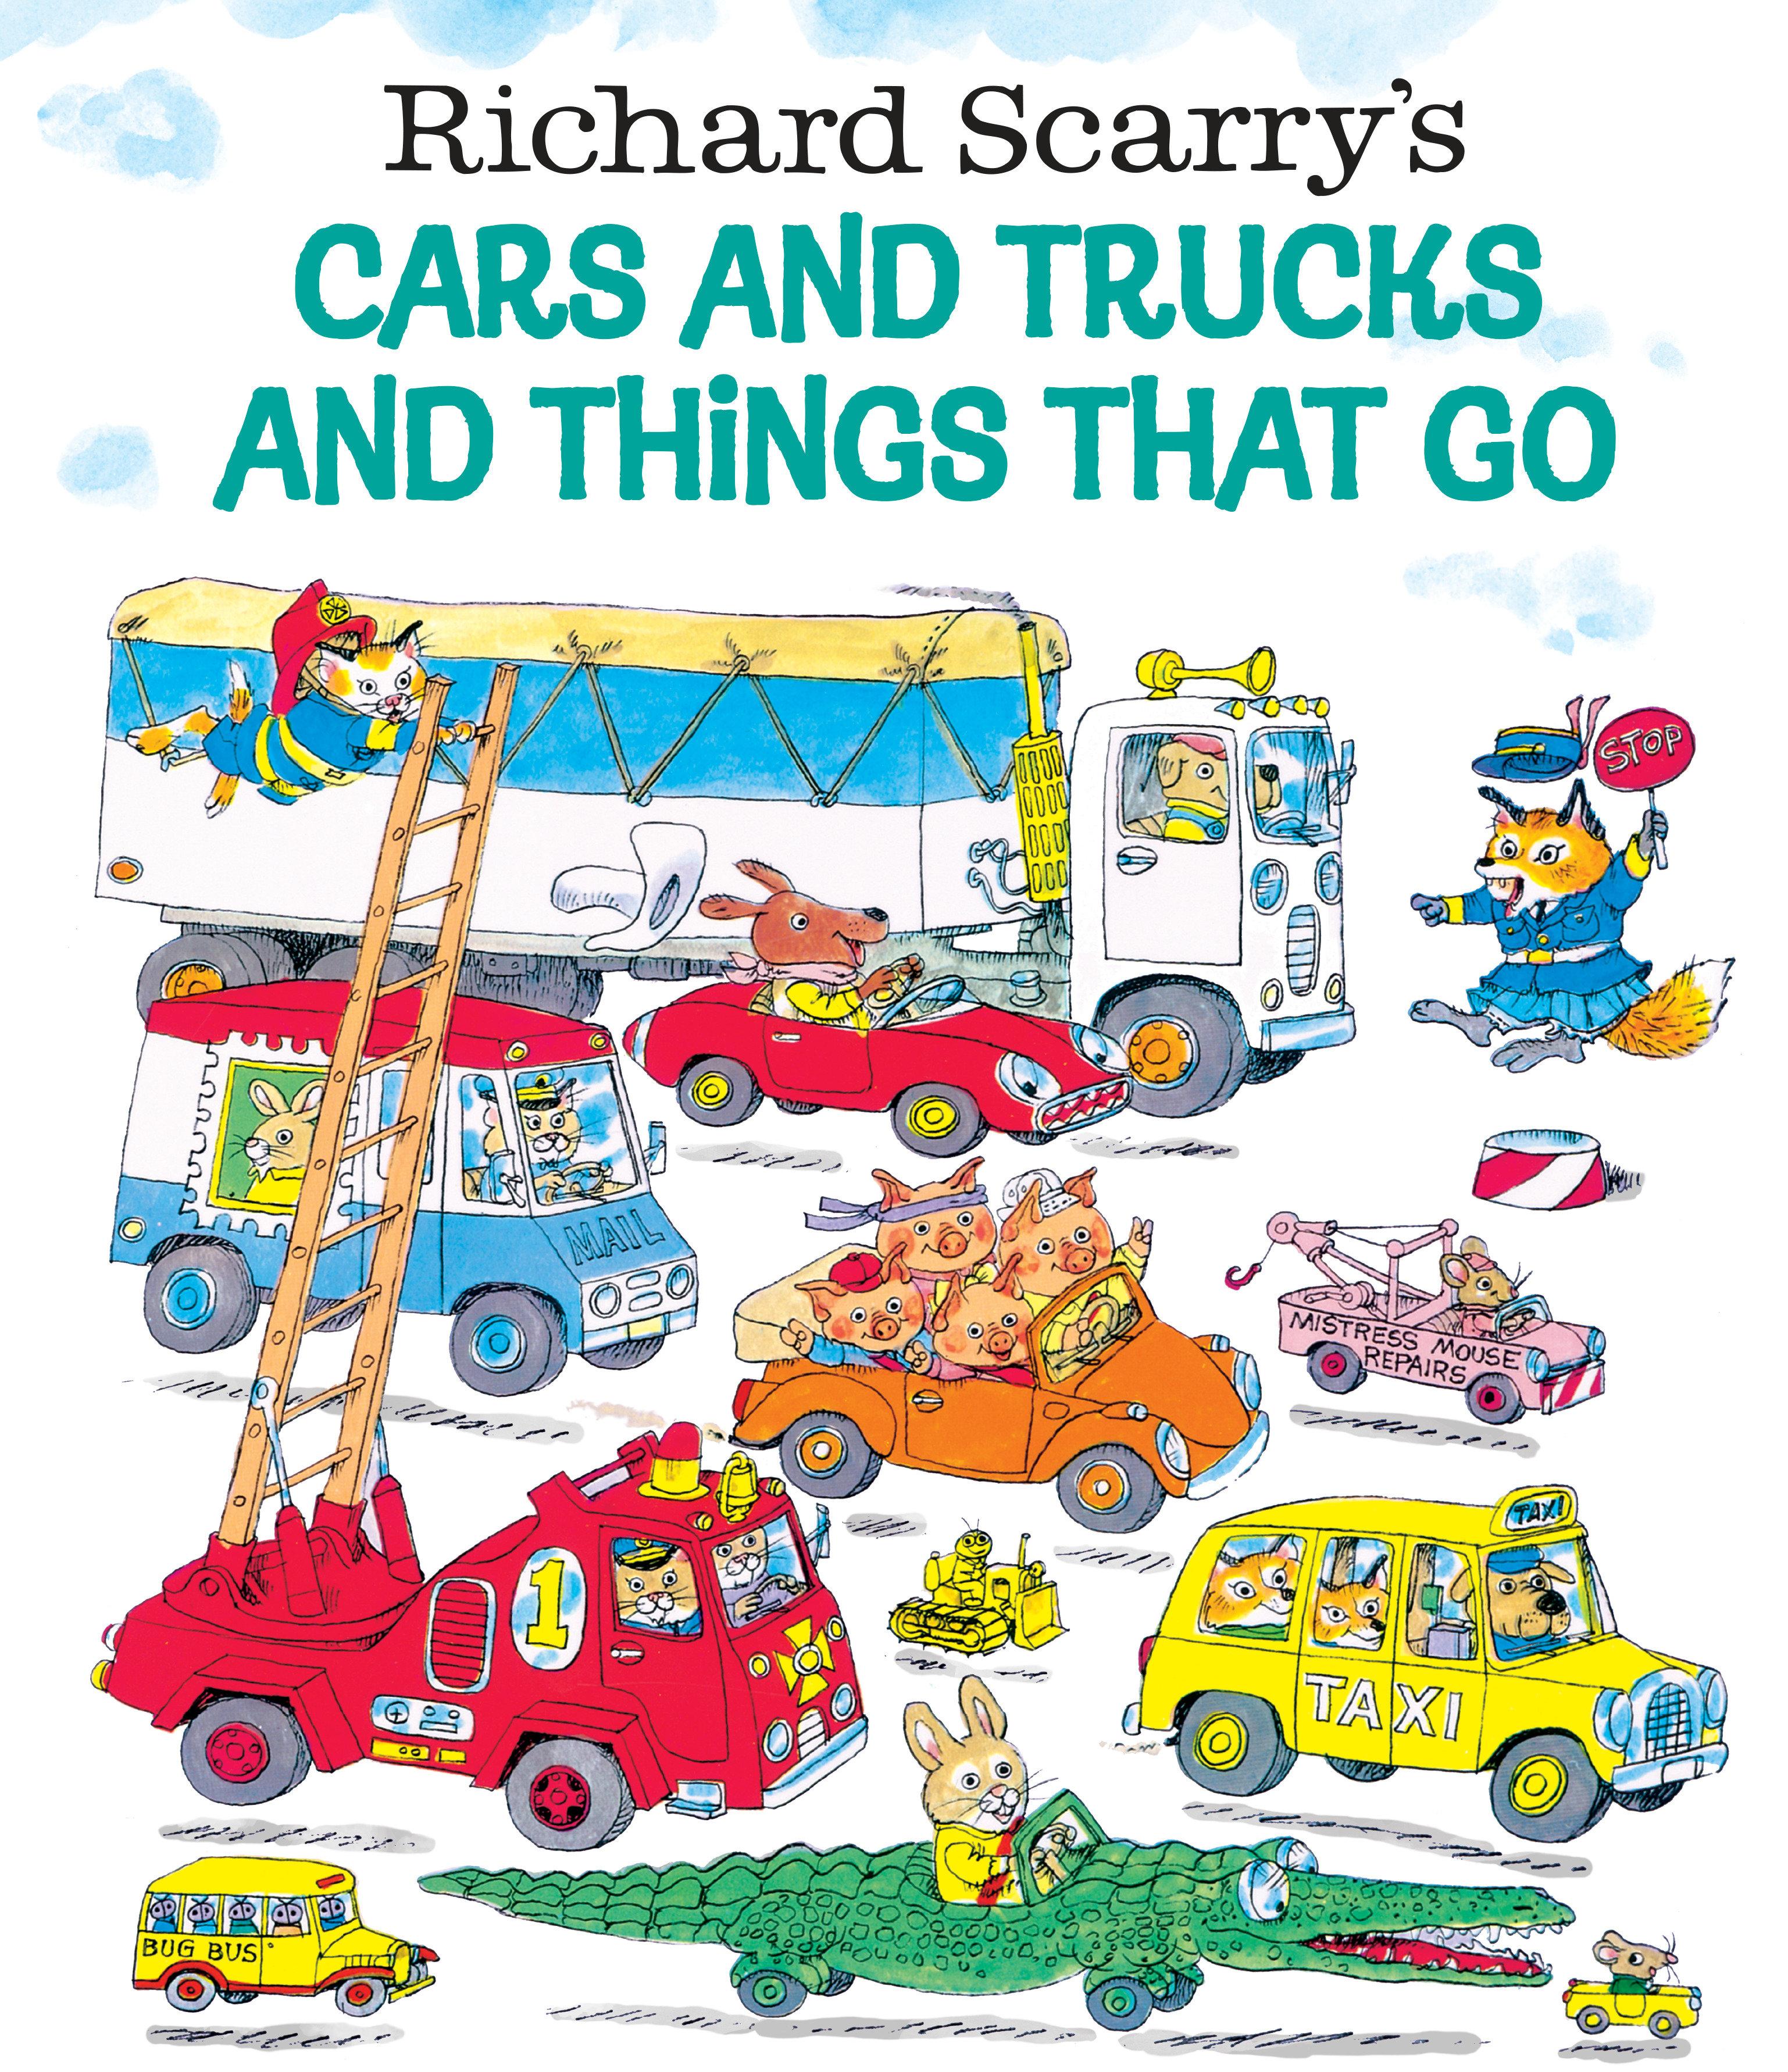 Richard Scarry's Cars and Trucks and Things That Go / Richard Scarry / Buch / 69 S. / Englisch / 1998 / Random House LLC US / EAN 9780307157850 - Scarry, Richard